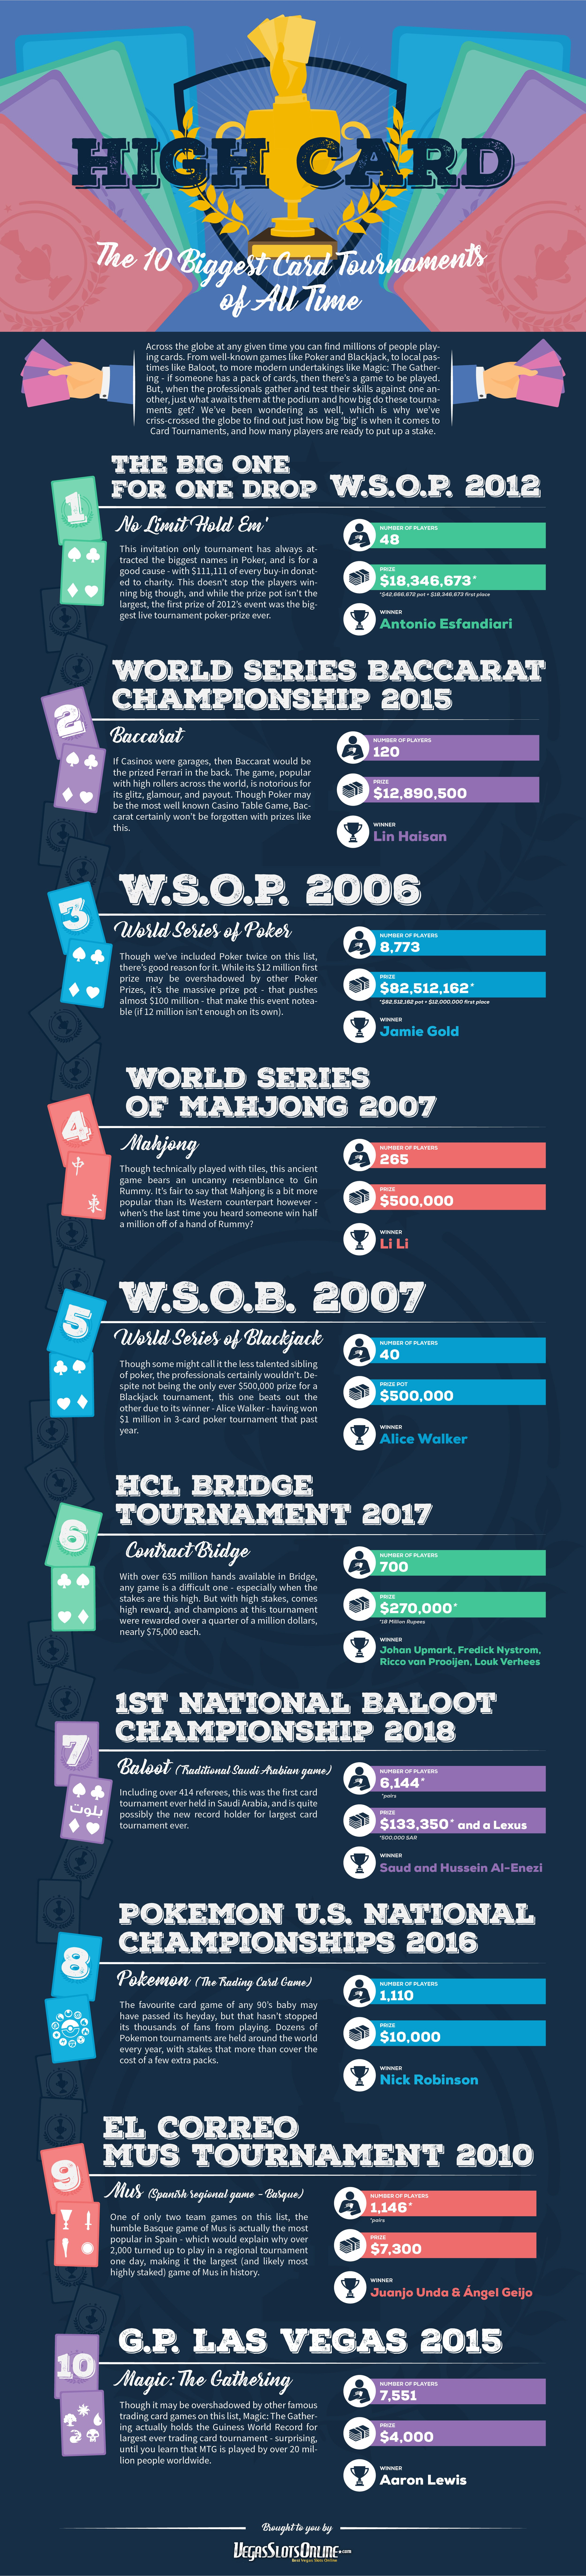 The biggest card tournaments in history [Infographic]